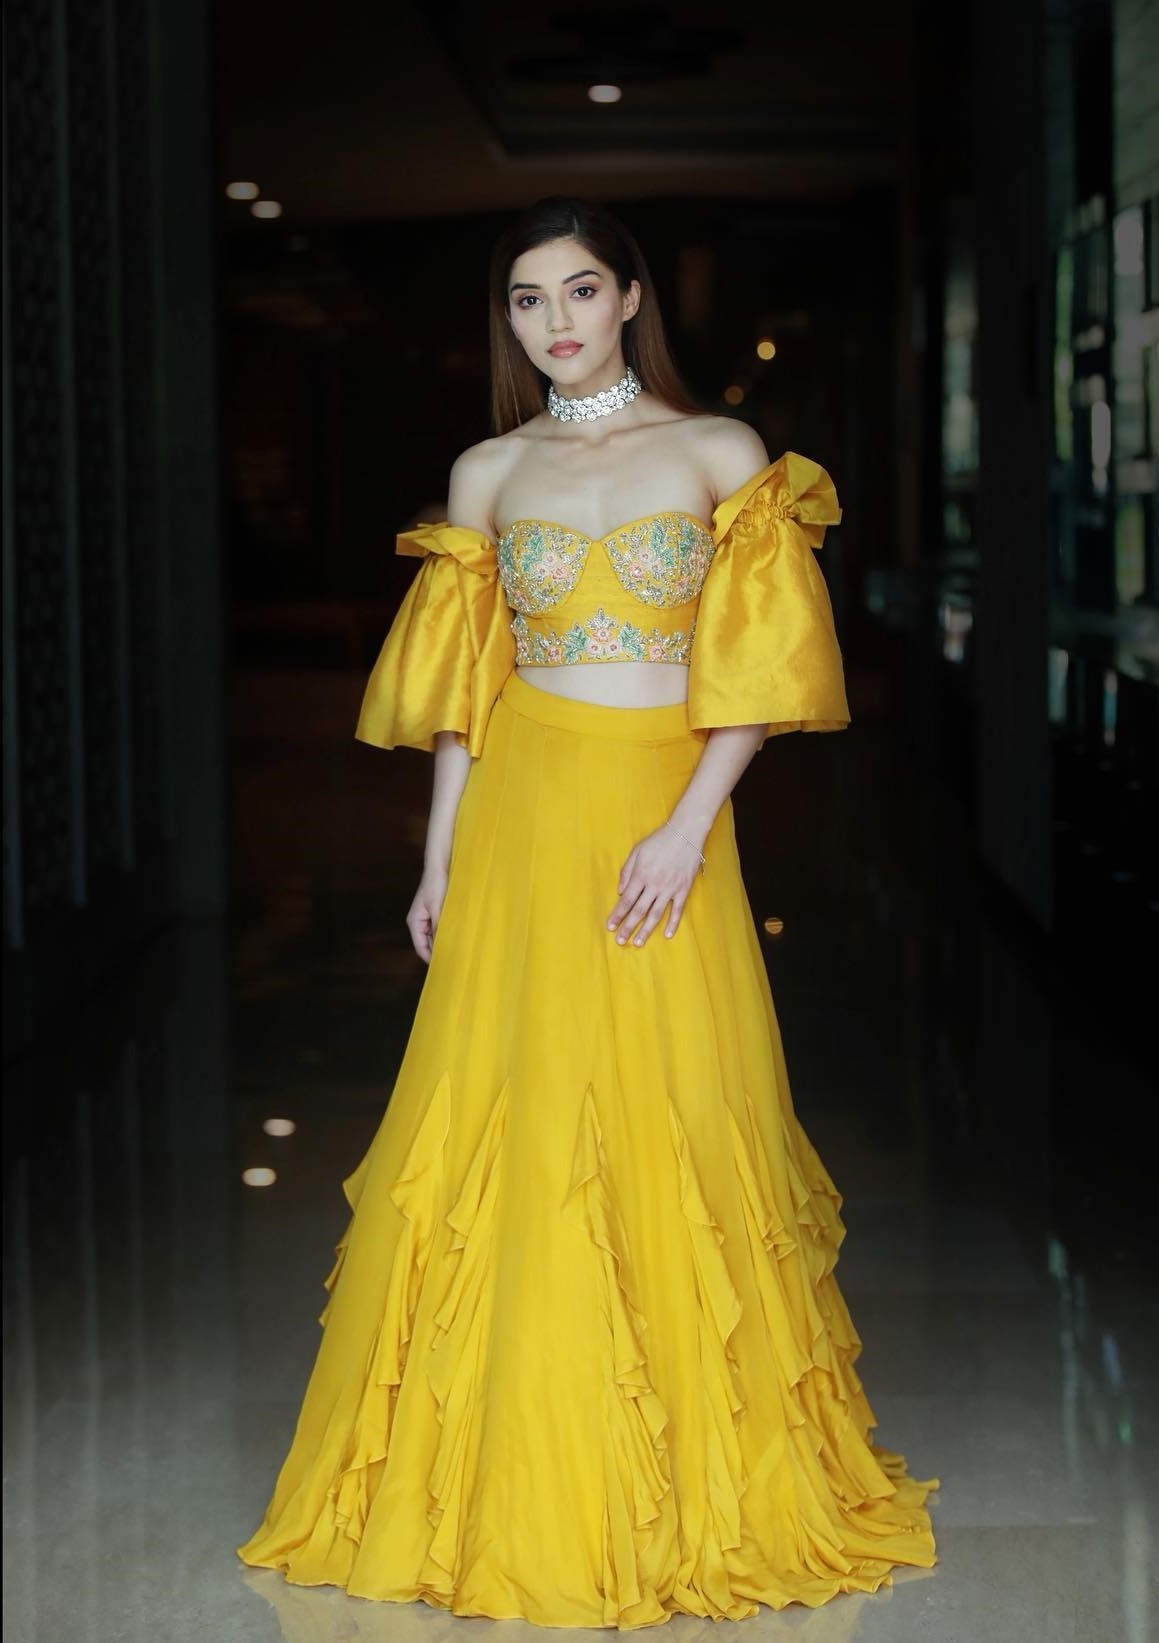 Mehreen Pirzada In Yellow Off Shoulder Embellished Bustier With Semi-Ruffled Skirt - Awestruck Looks & Glamorous Outfits